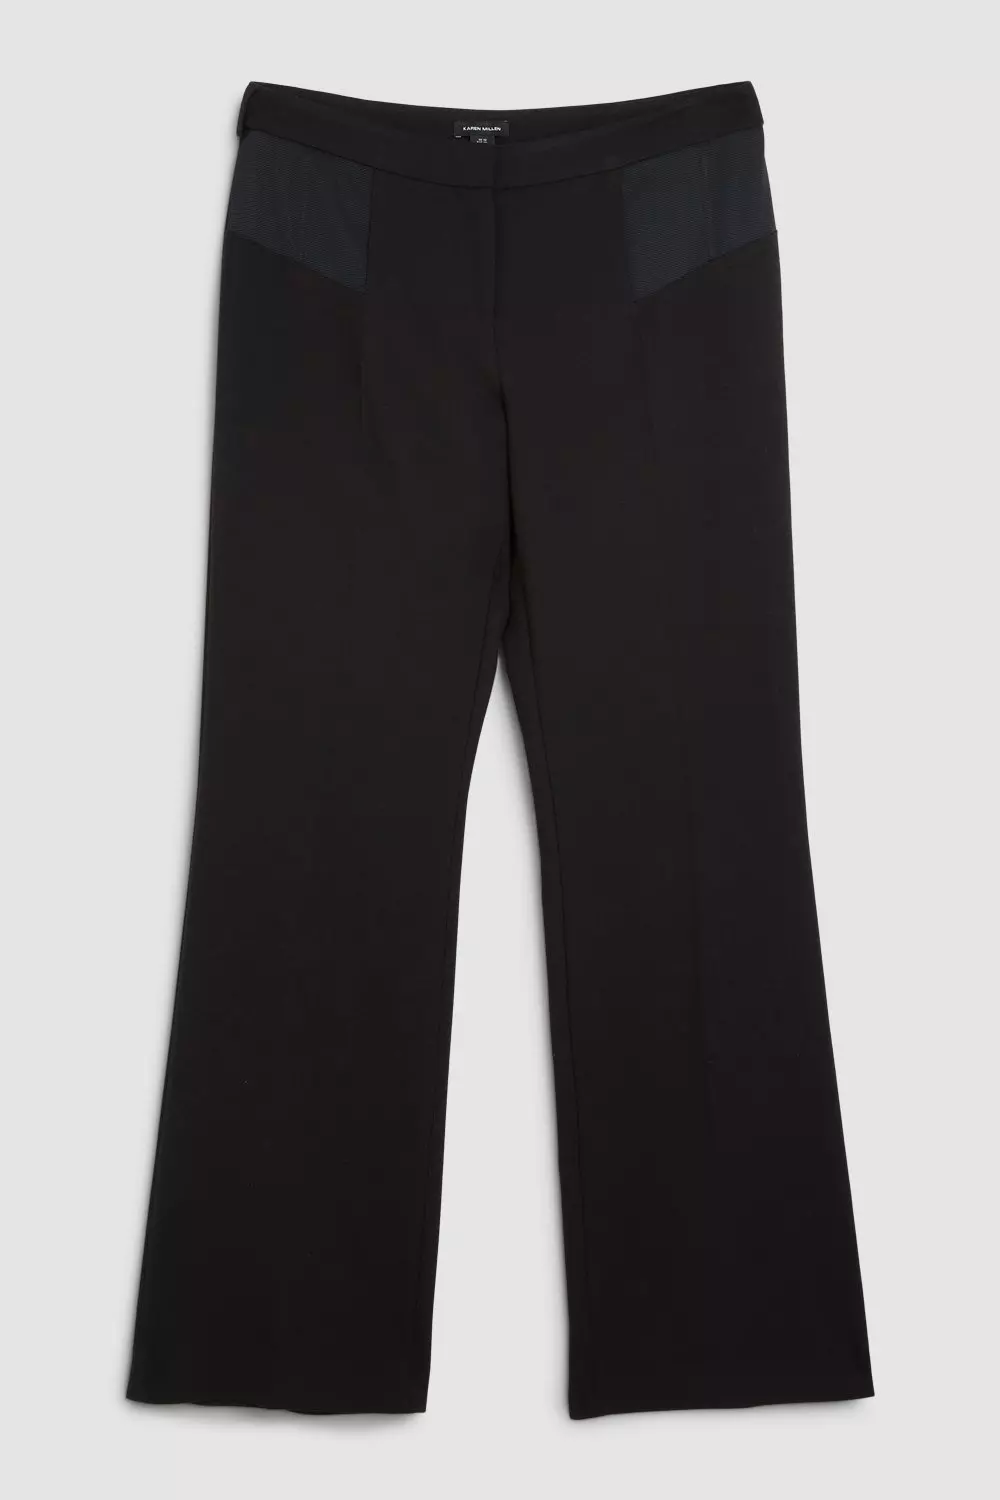 Compact Stretch Contrast Panel Detail Flared Pants